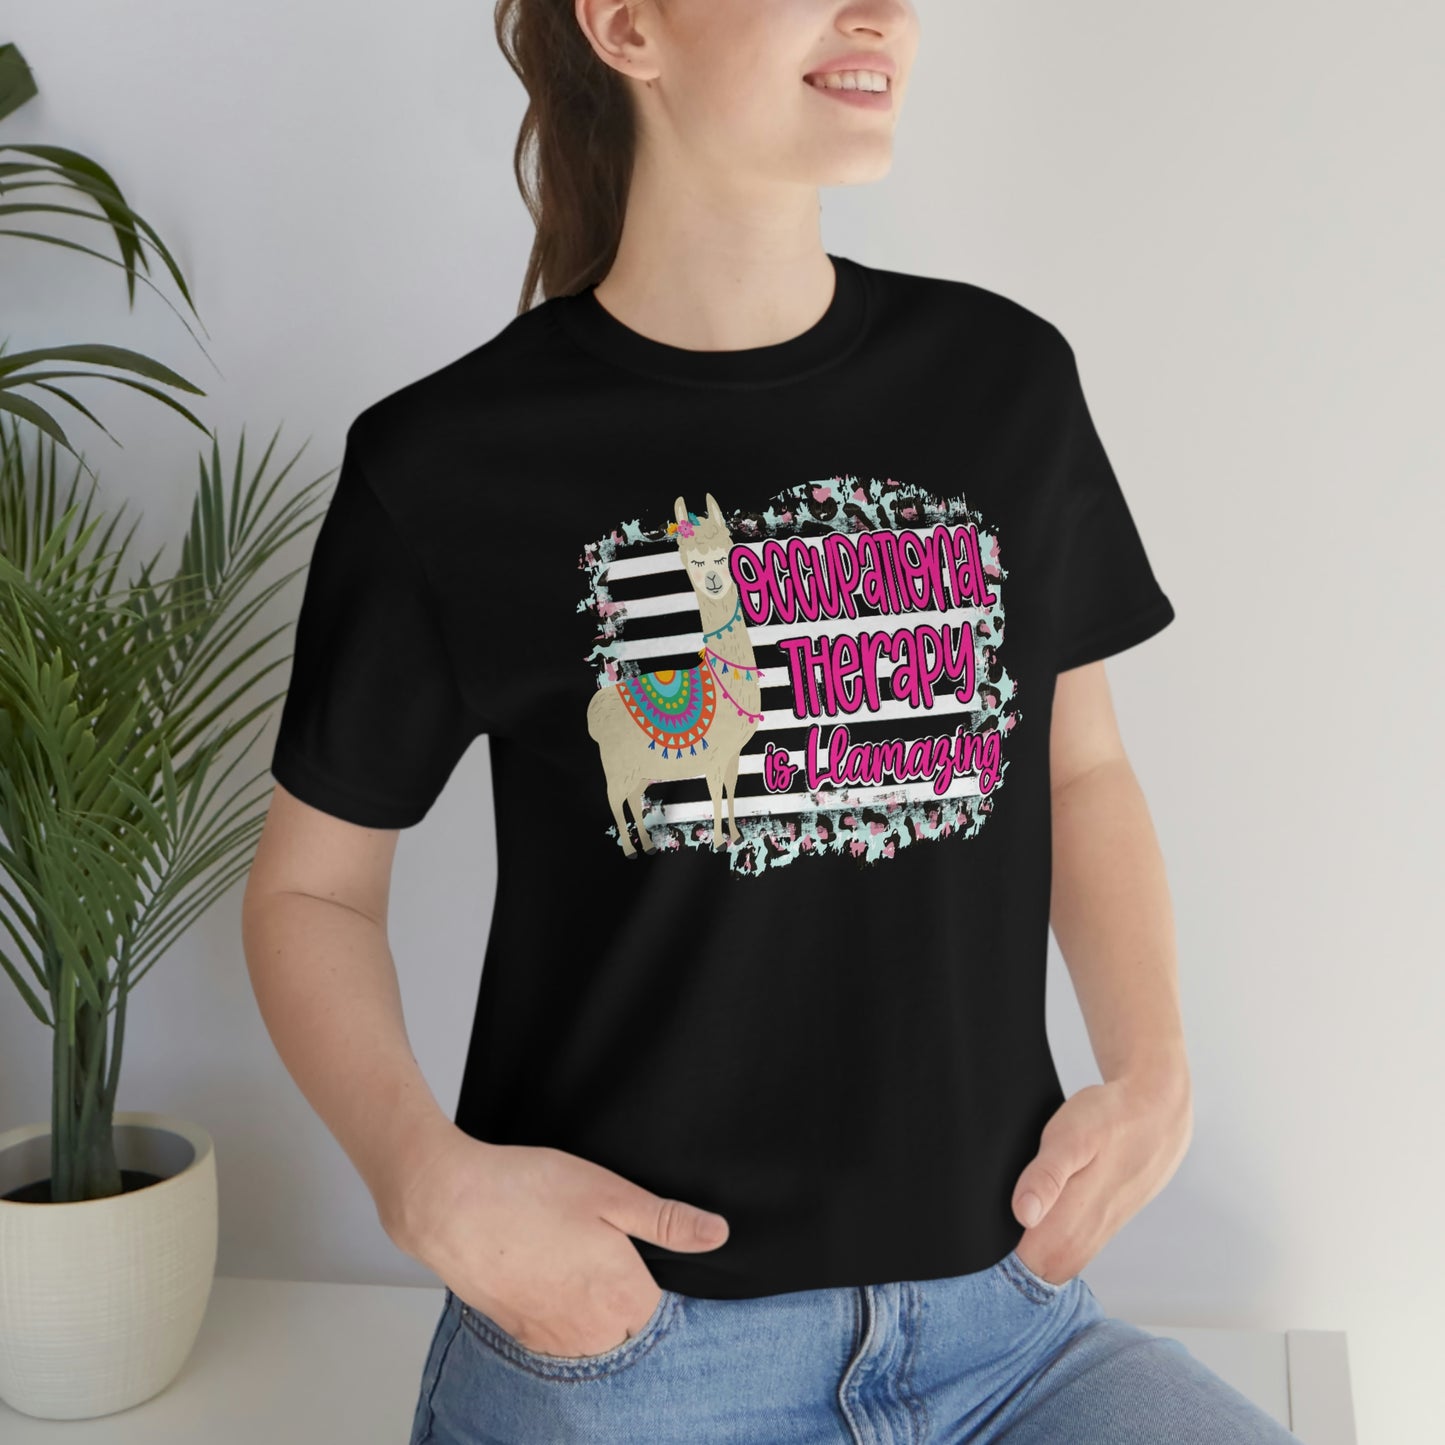 Occupational Therapy is Llamazing Cute Funny Shirt - Career, OT Therapist